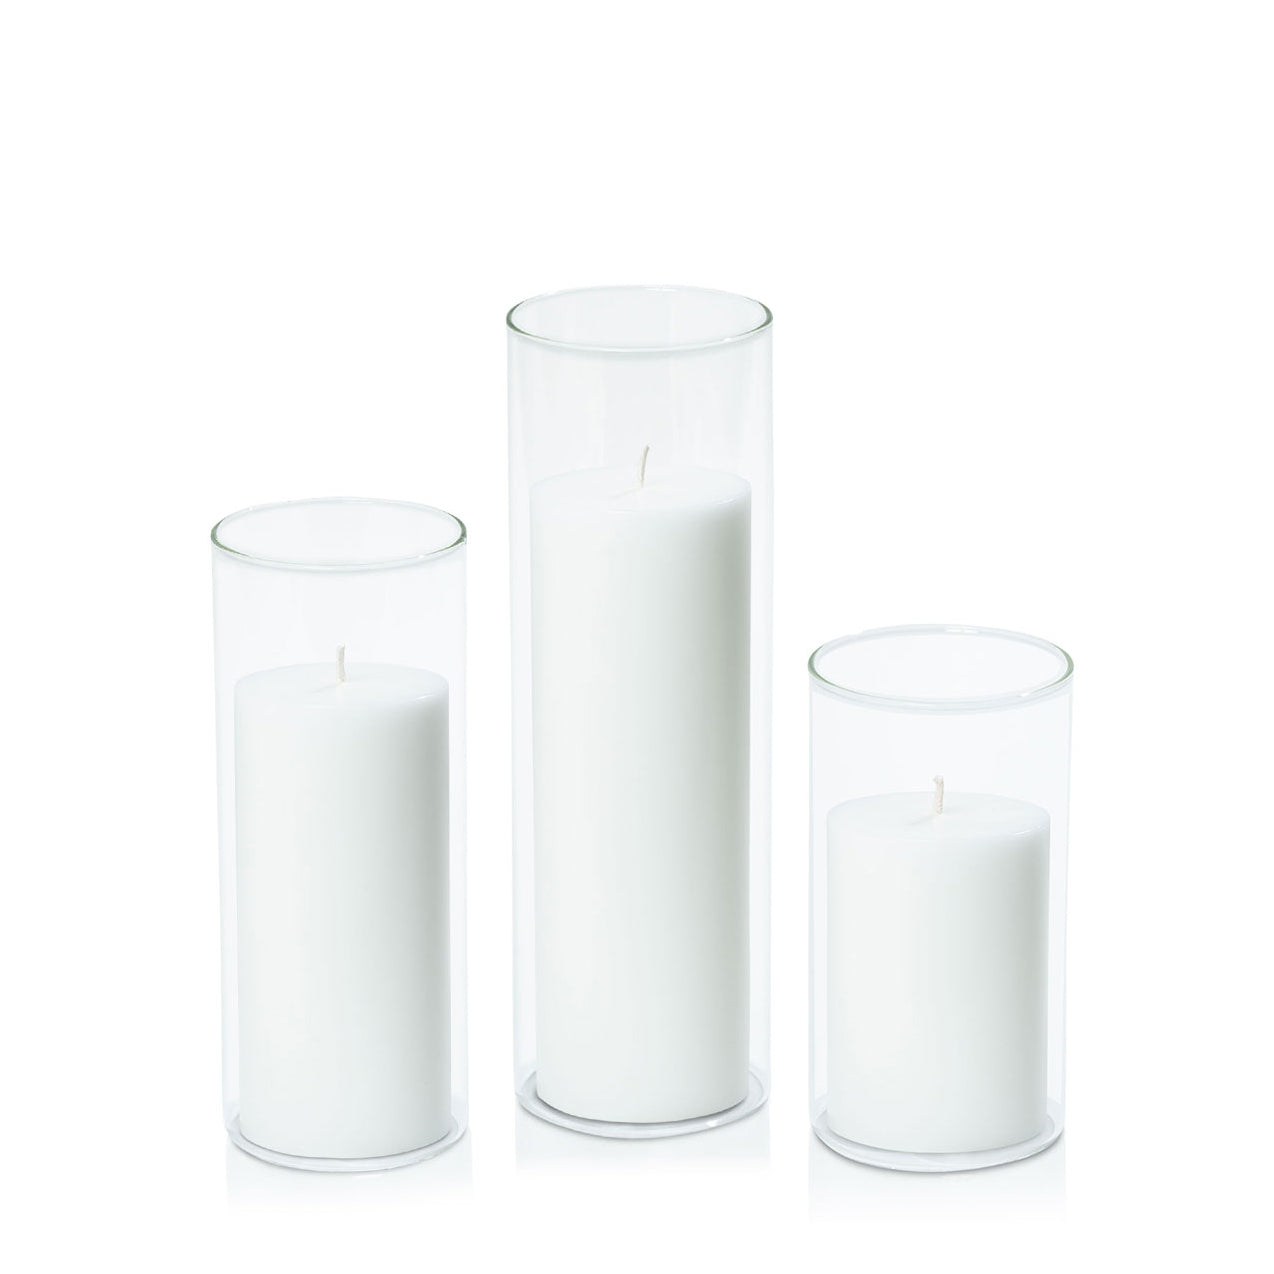 Trio of Cylinder Candle Holders (inc. Pillar Candles) **PURCHASE ITEM ONLY**